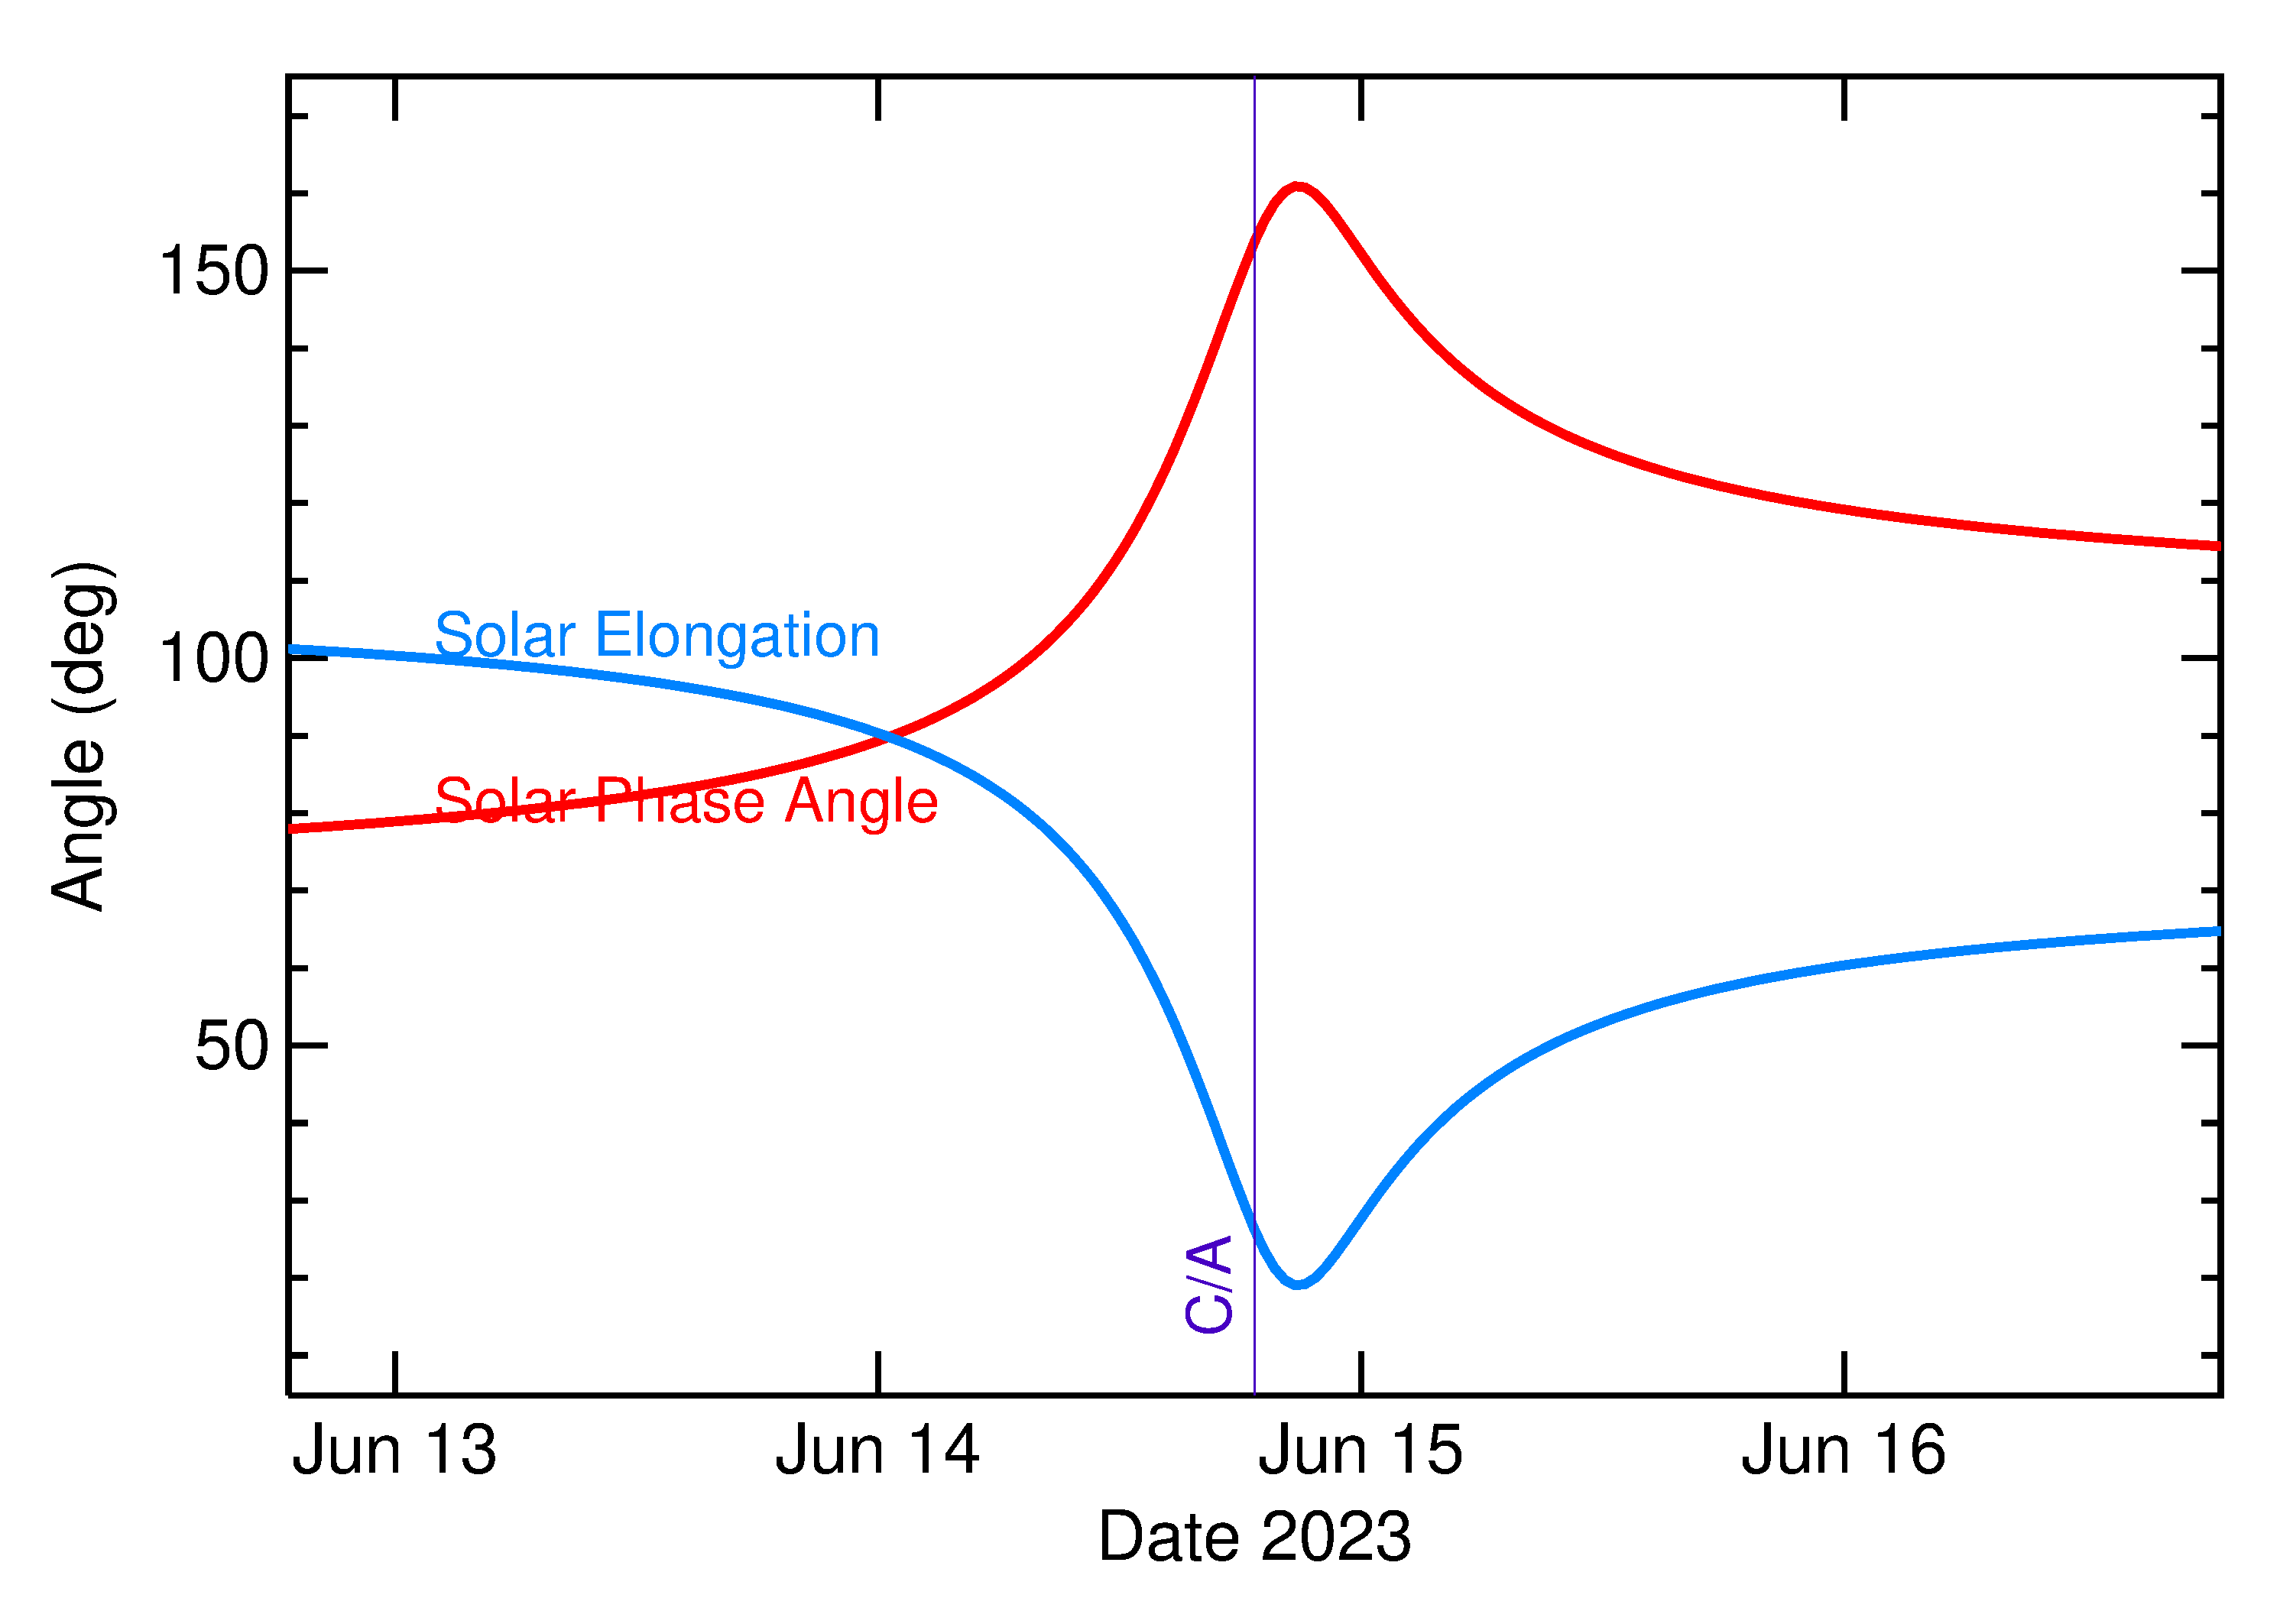 Solar Elongation and Solar Phase Angle of 2023 LZ in the days around closest approach